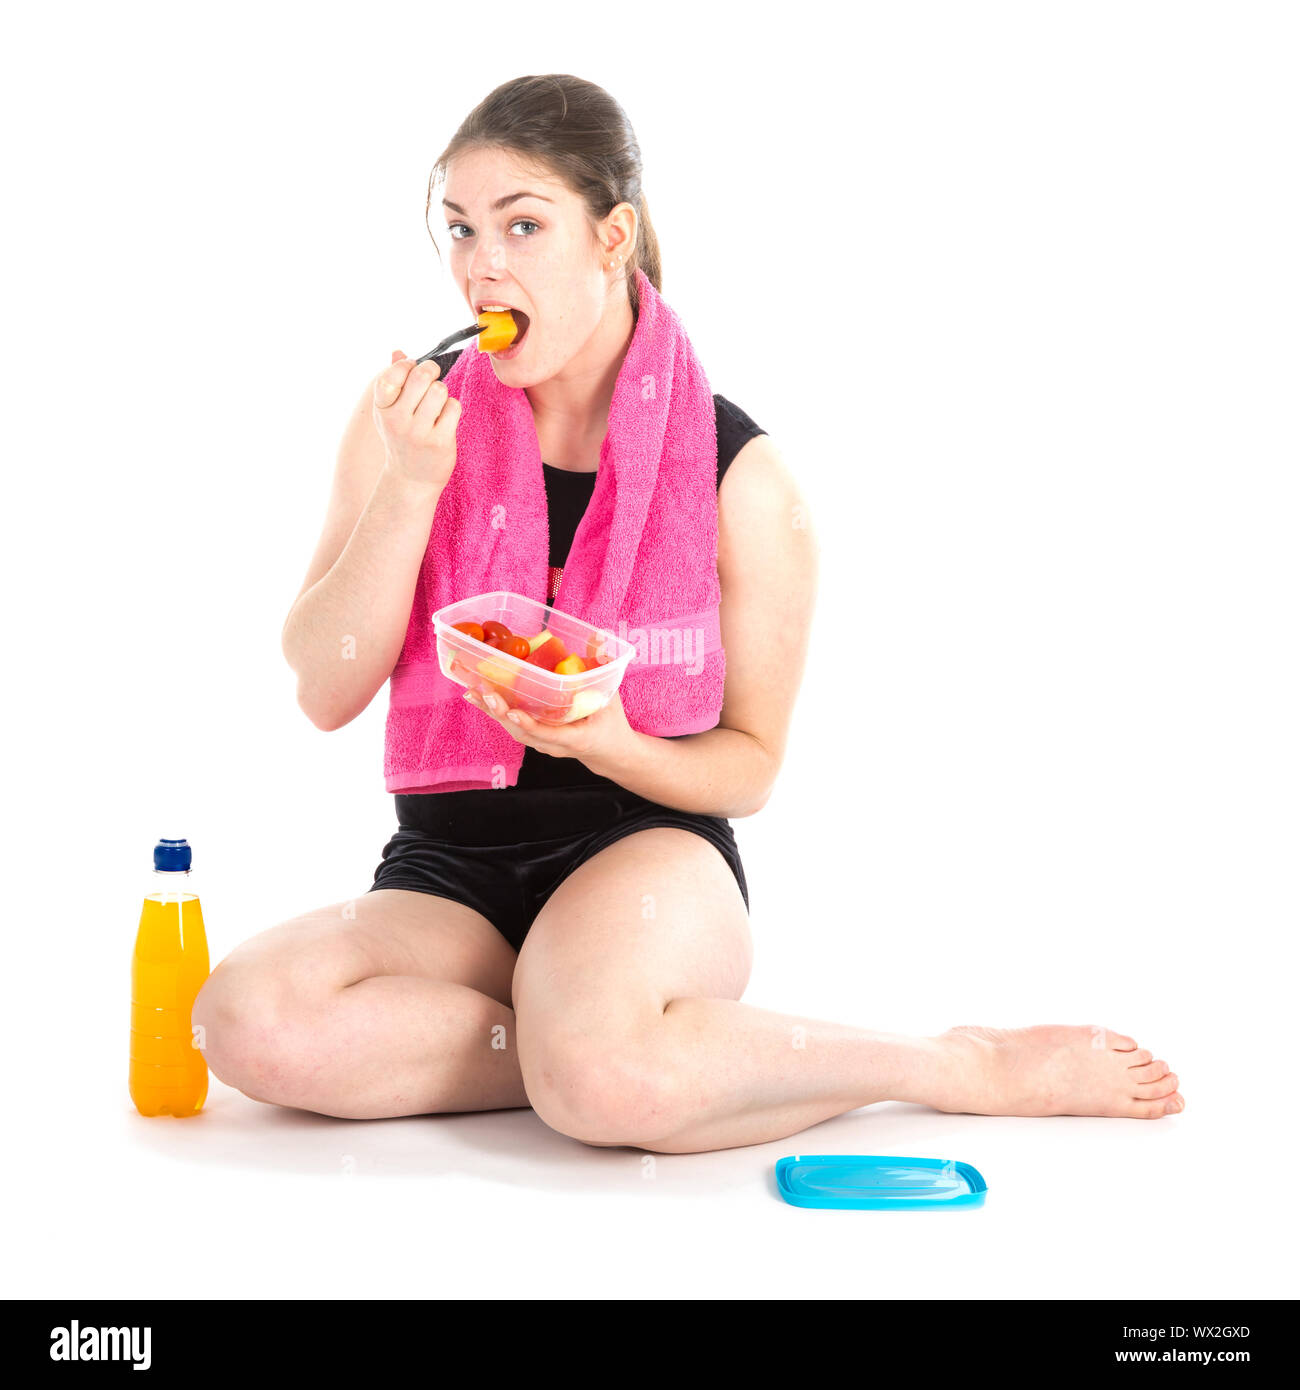 Front view of sitting woman with purple towel eating fresh fruits Stock Photo